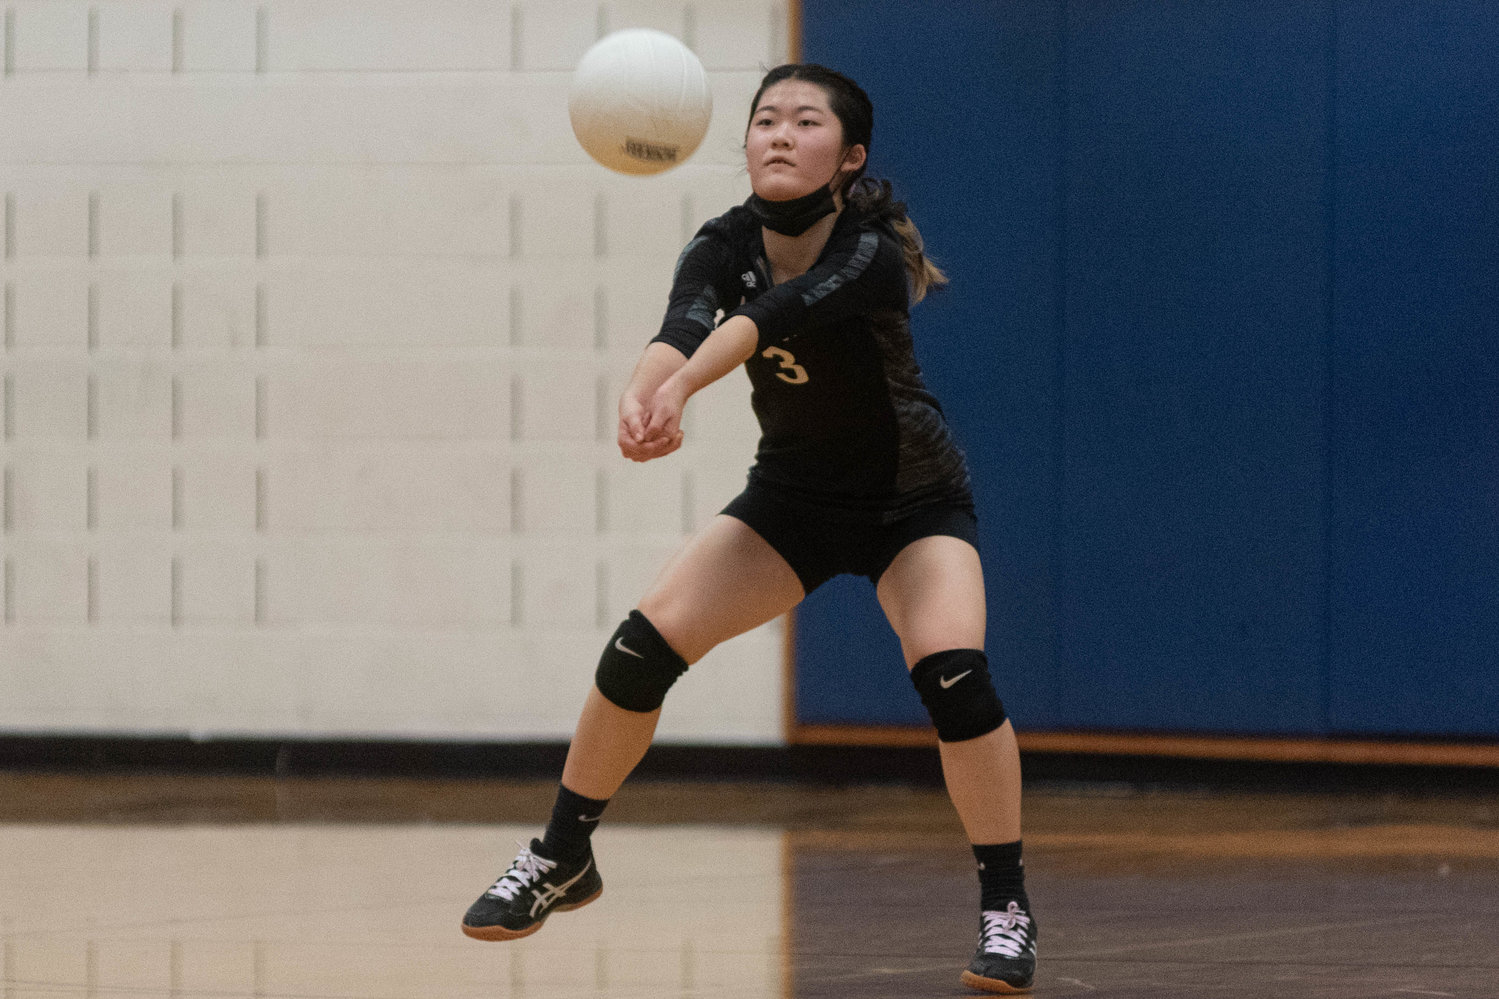 Napavine freshman defensive specialist Emily Kang recieves a serve in a 3-1 loss to Ocosta in the opening round of the District 4 Tournament in Adna Oct. 30.